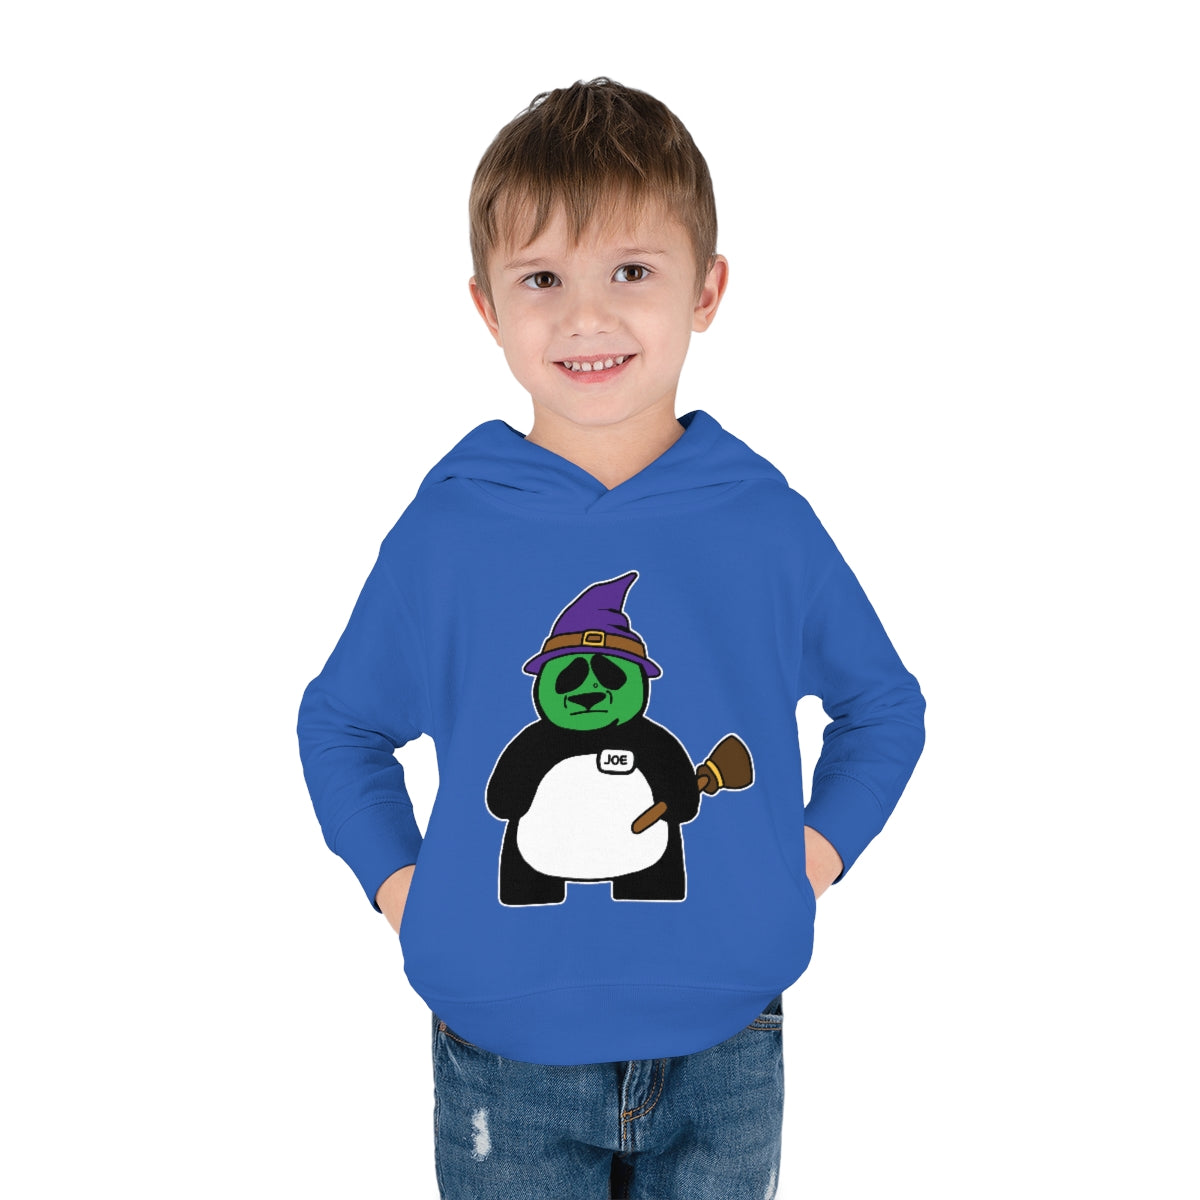 Witch Hoodie - Toddler